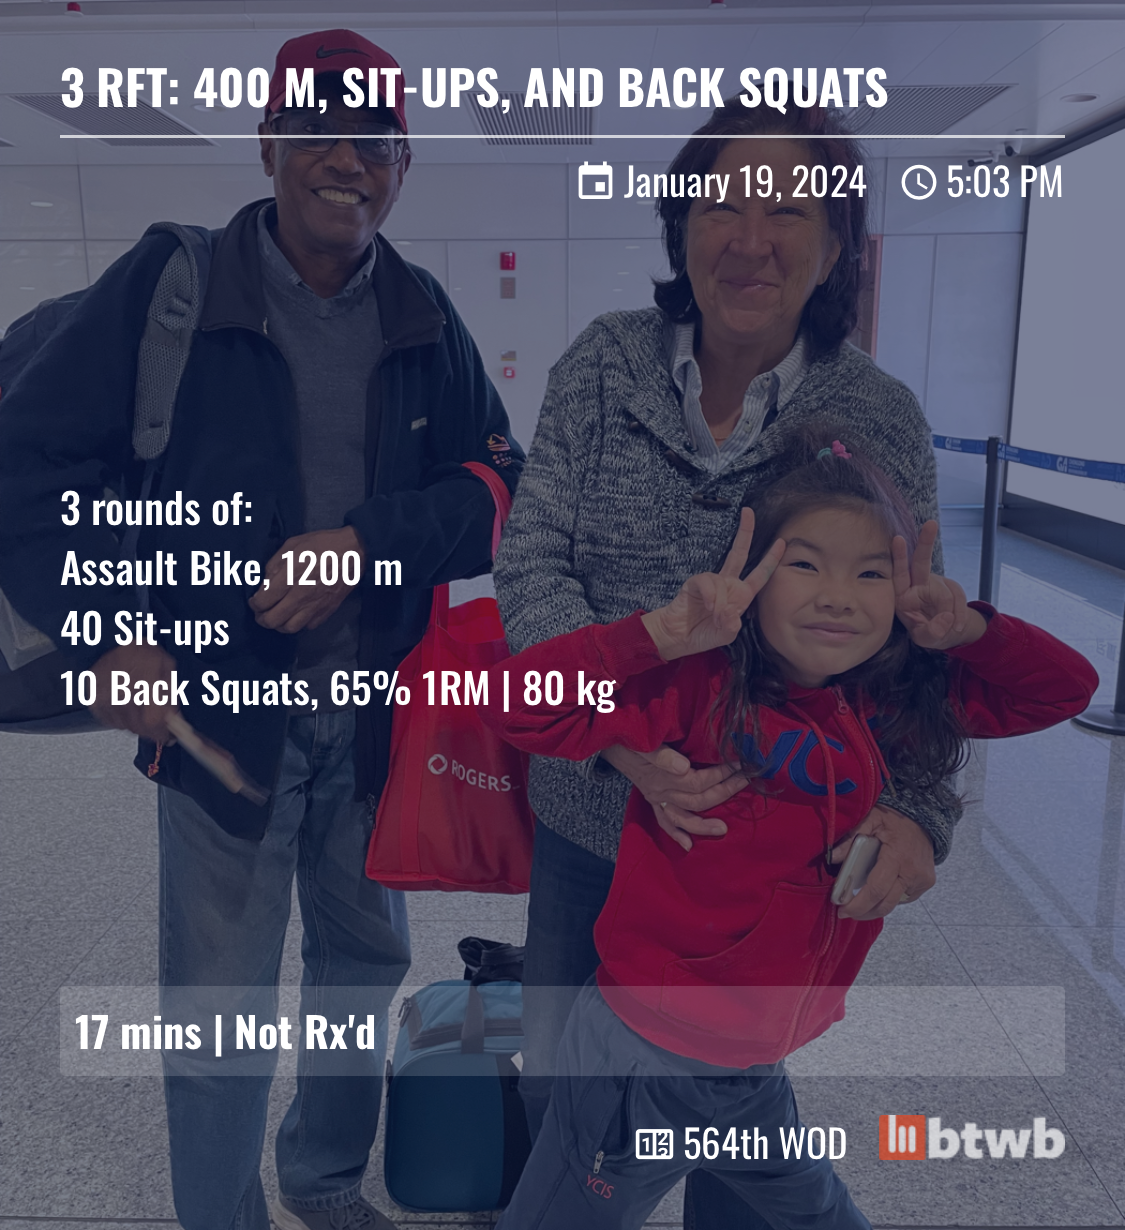 my workout (3 rounds of 1200m Assault bike, 40 sit ups and 10 back squats at 80kg) over the top of a photo of my parents with my daughter at the airport